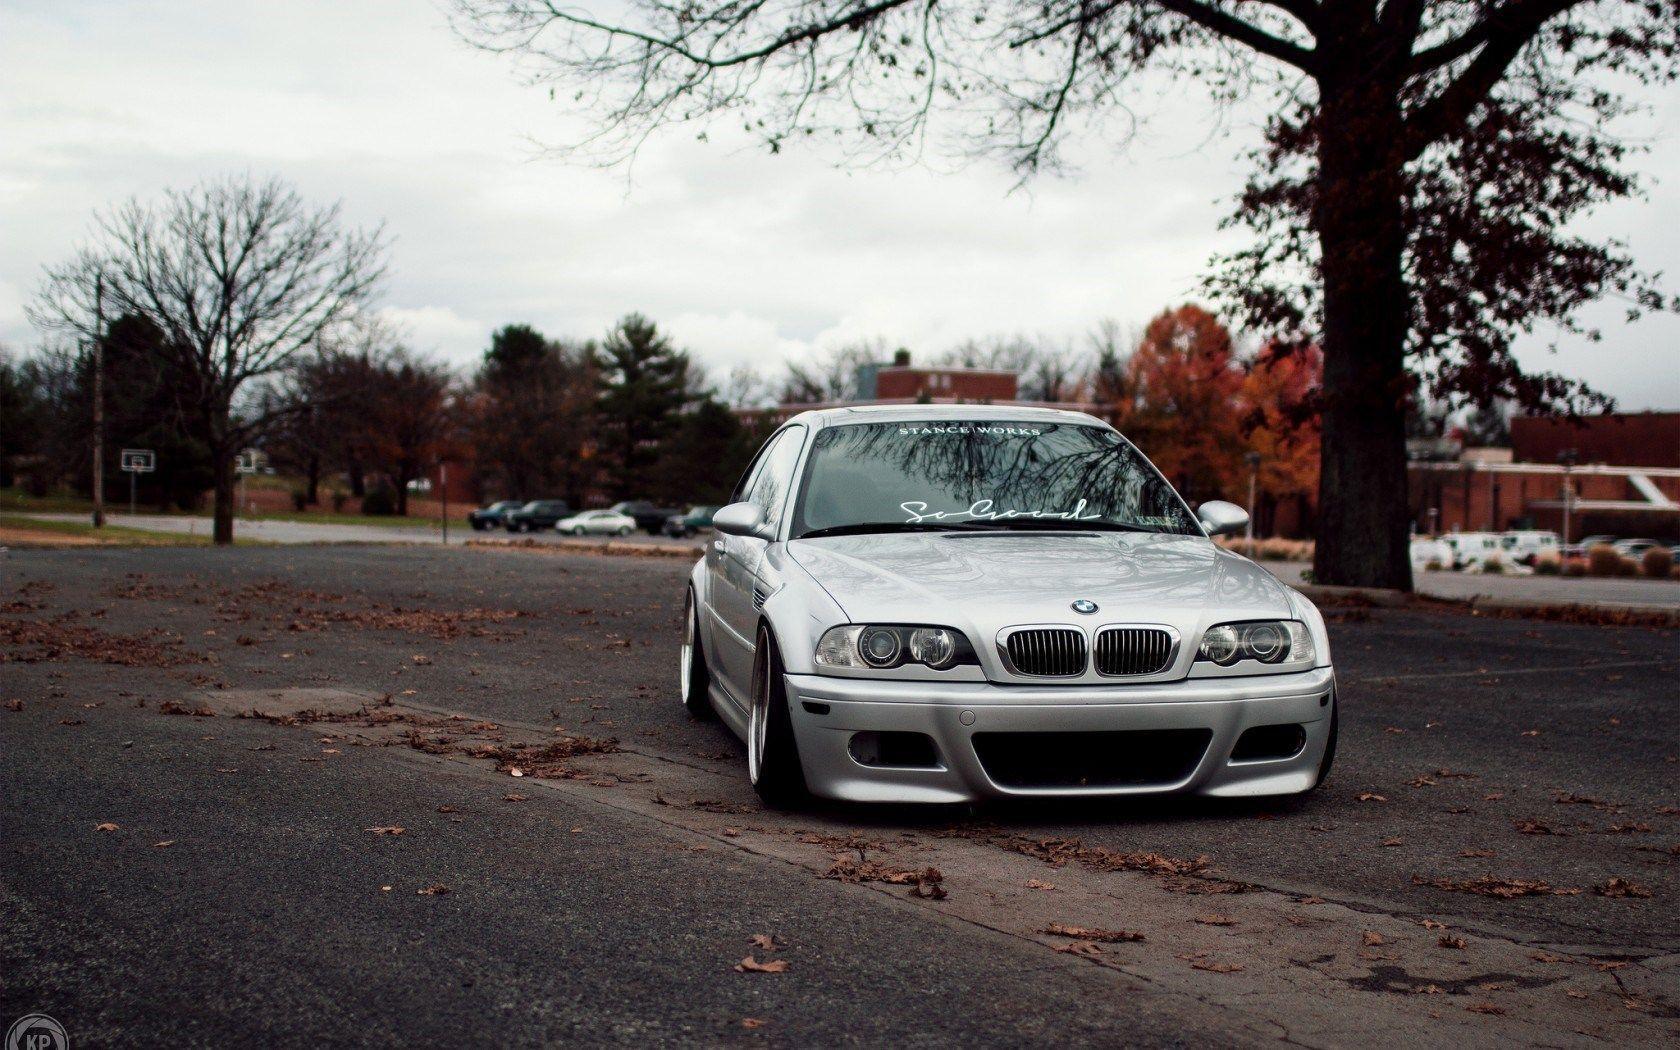 BMW M3 E46 Parking Lot Under Tree Fall HD Wallpapers